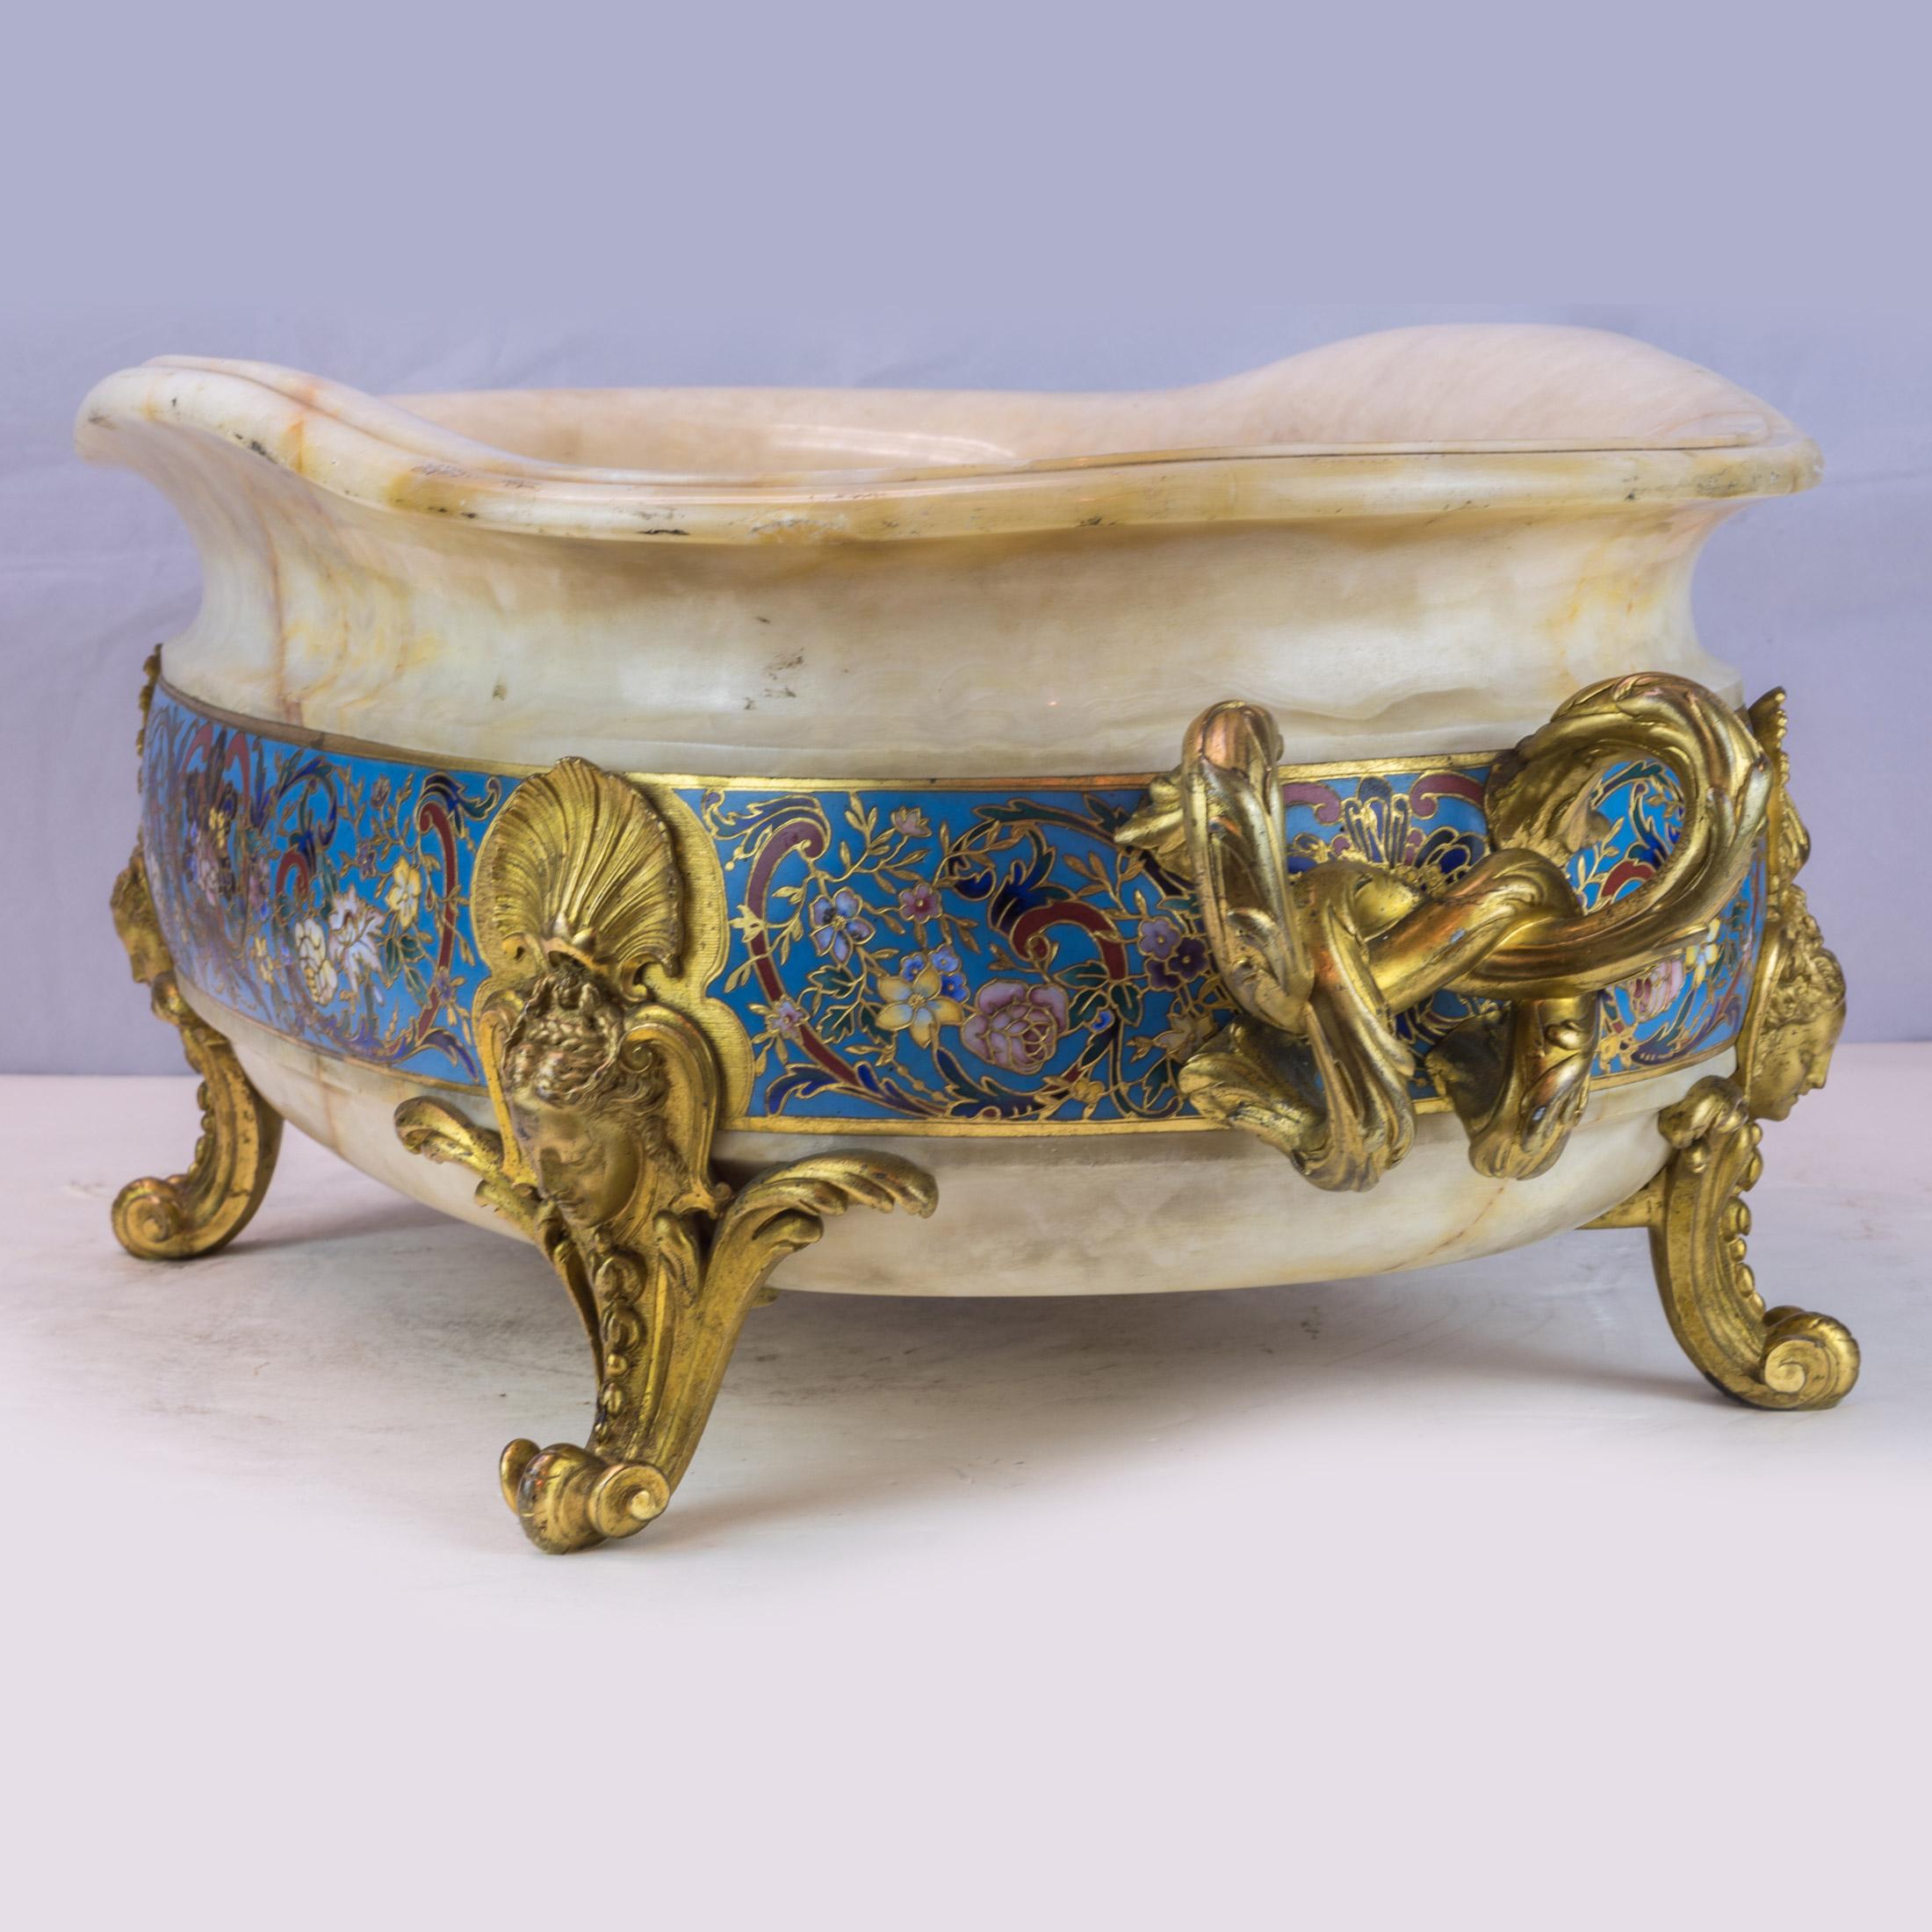 French Ormolu-Mounted and Champlevé Enamel Decorated Onyx Jardinière by Barbedienne For Sale